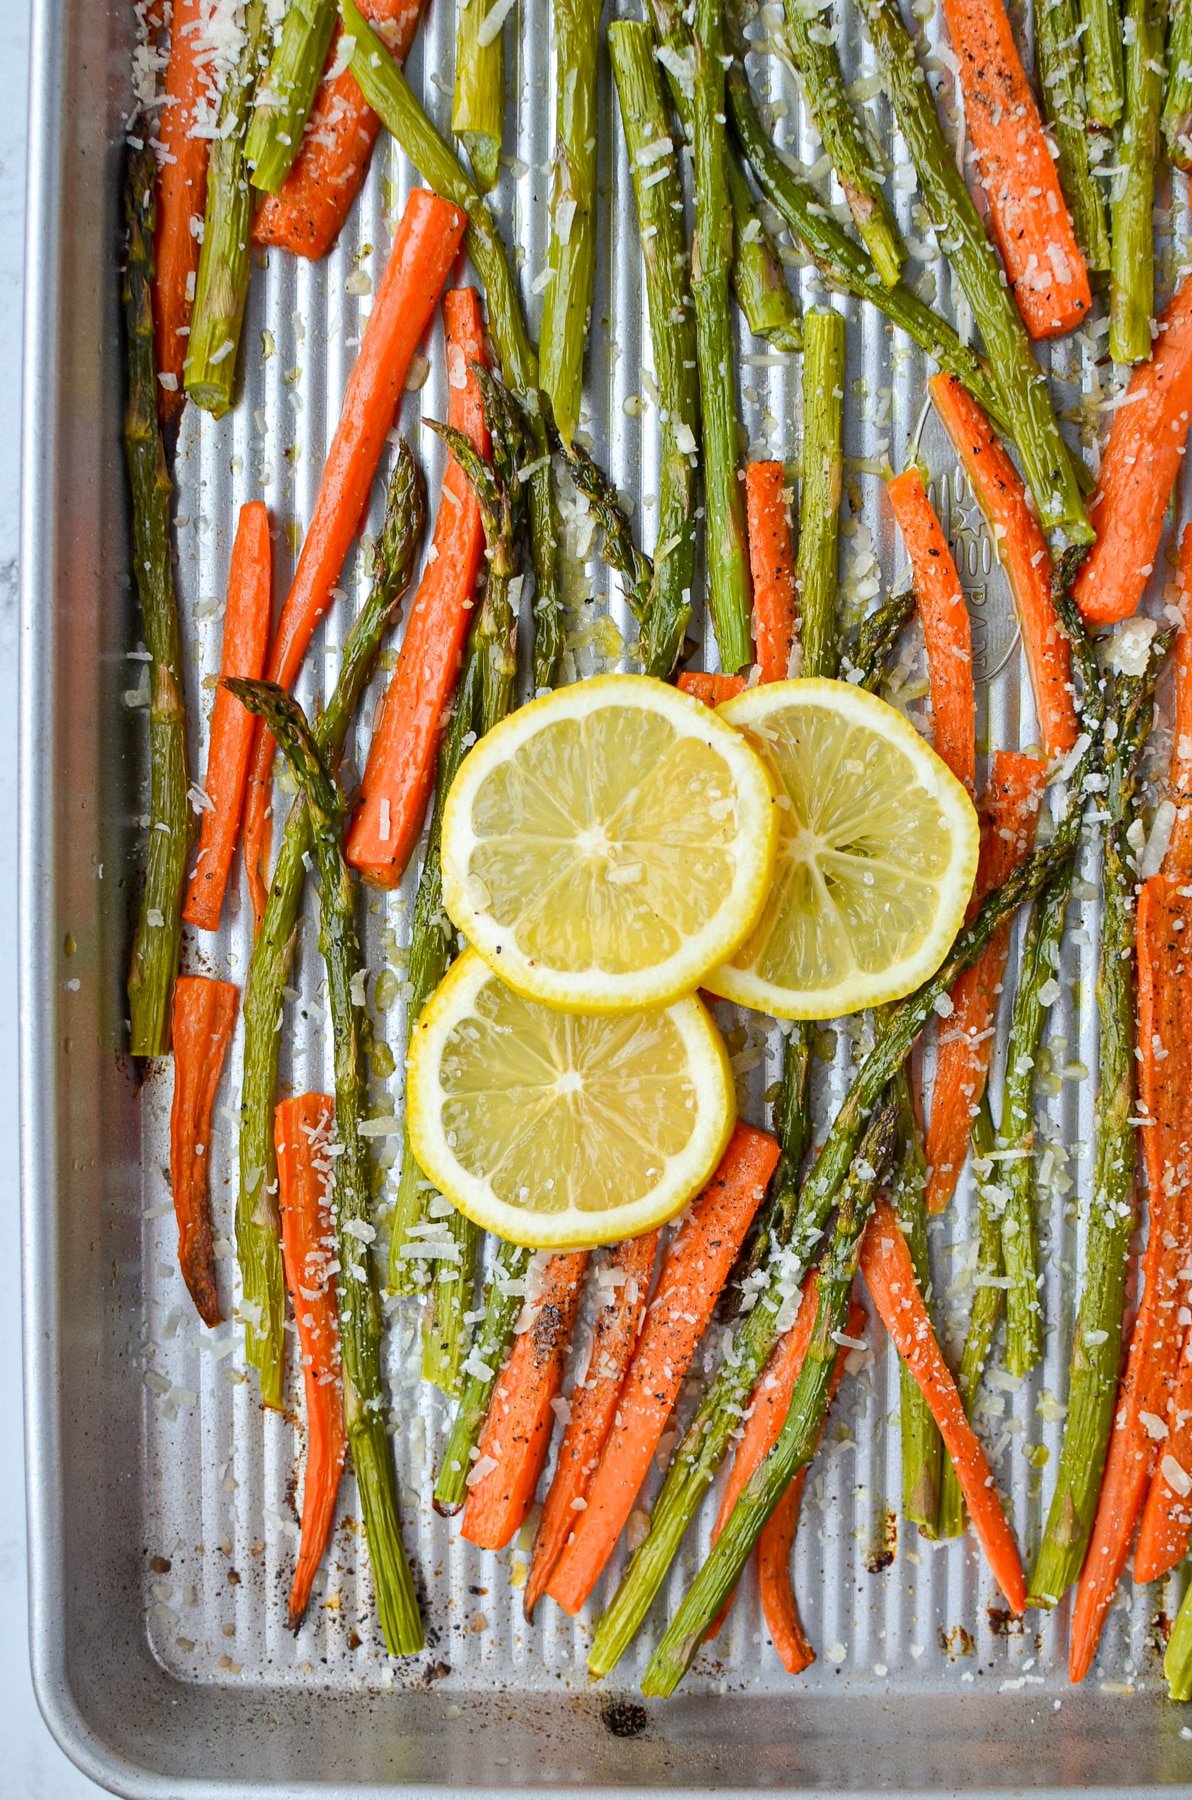 A sheet pan with roasted veggies garnished with lemon.